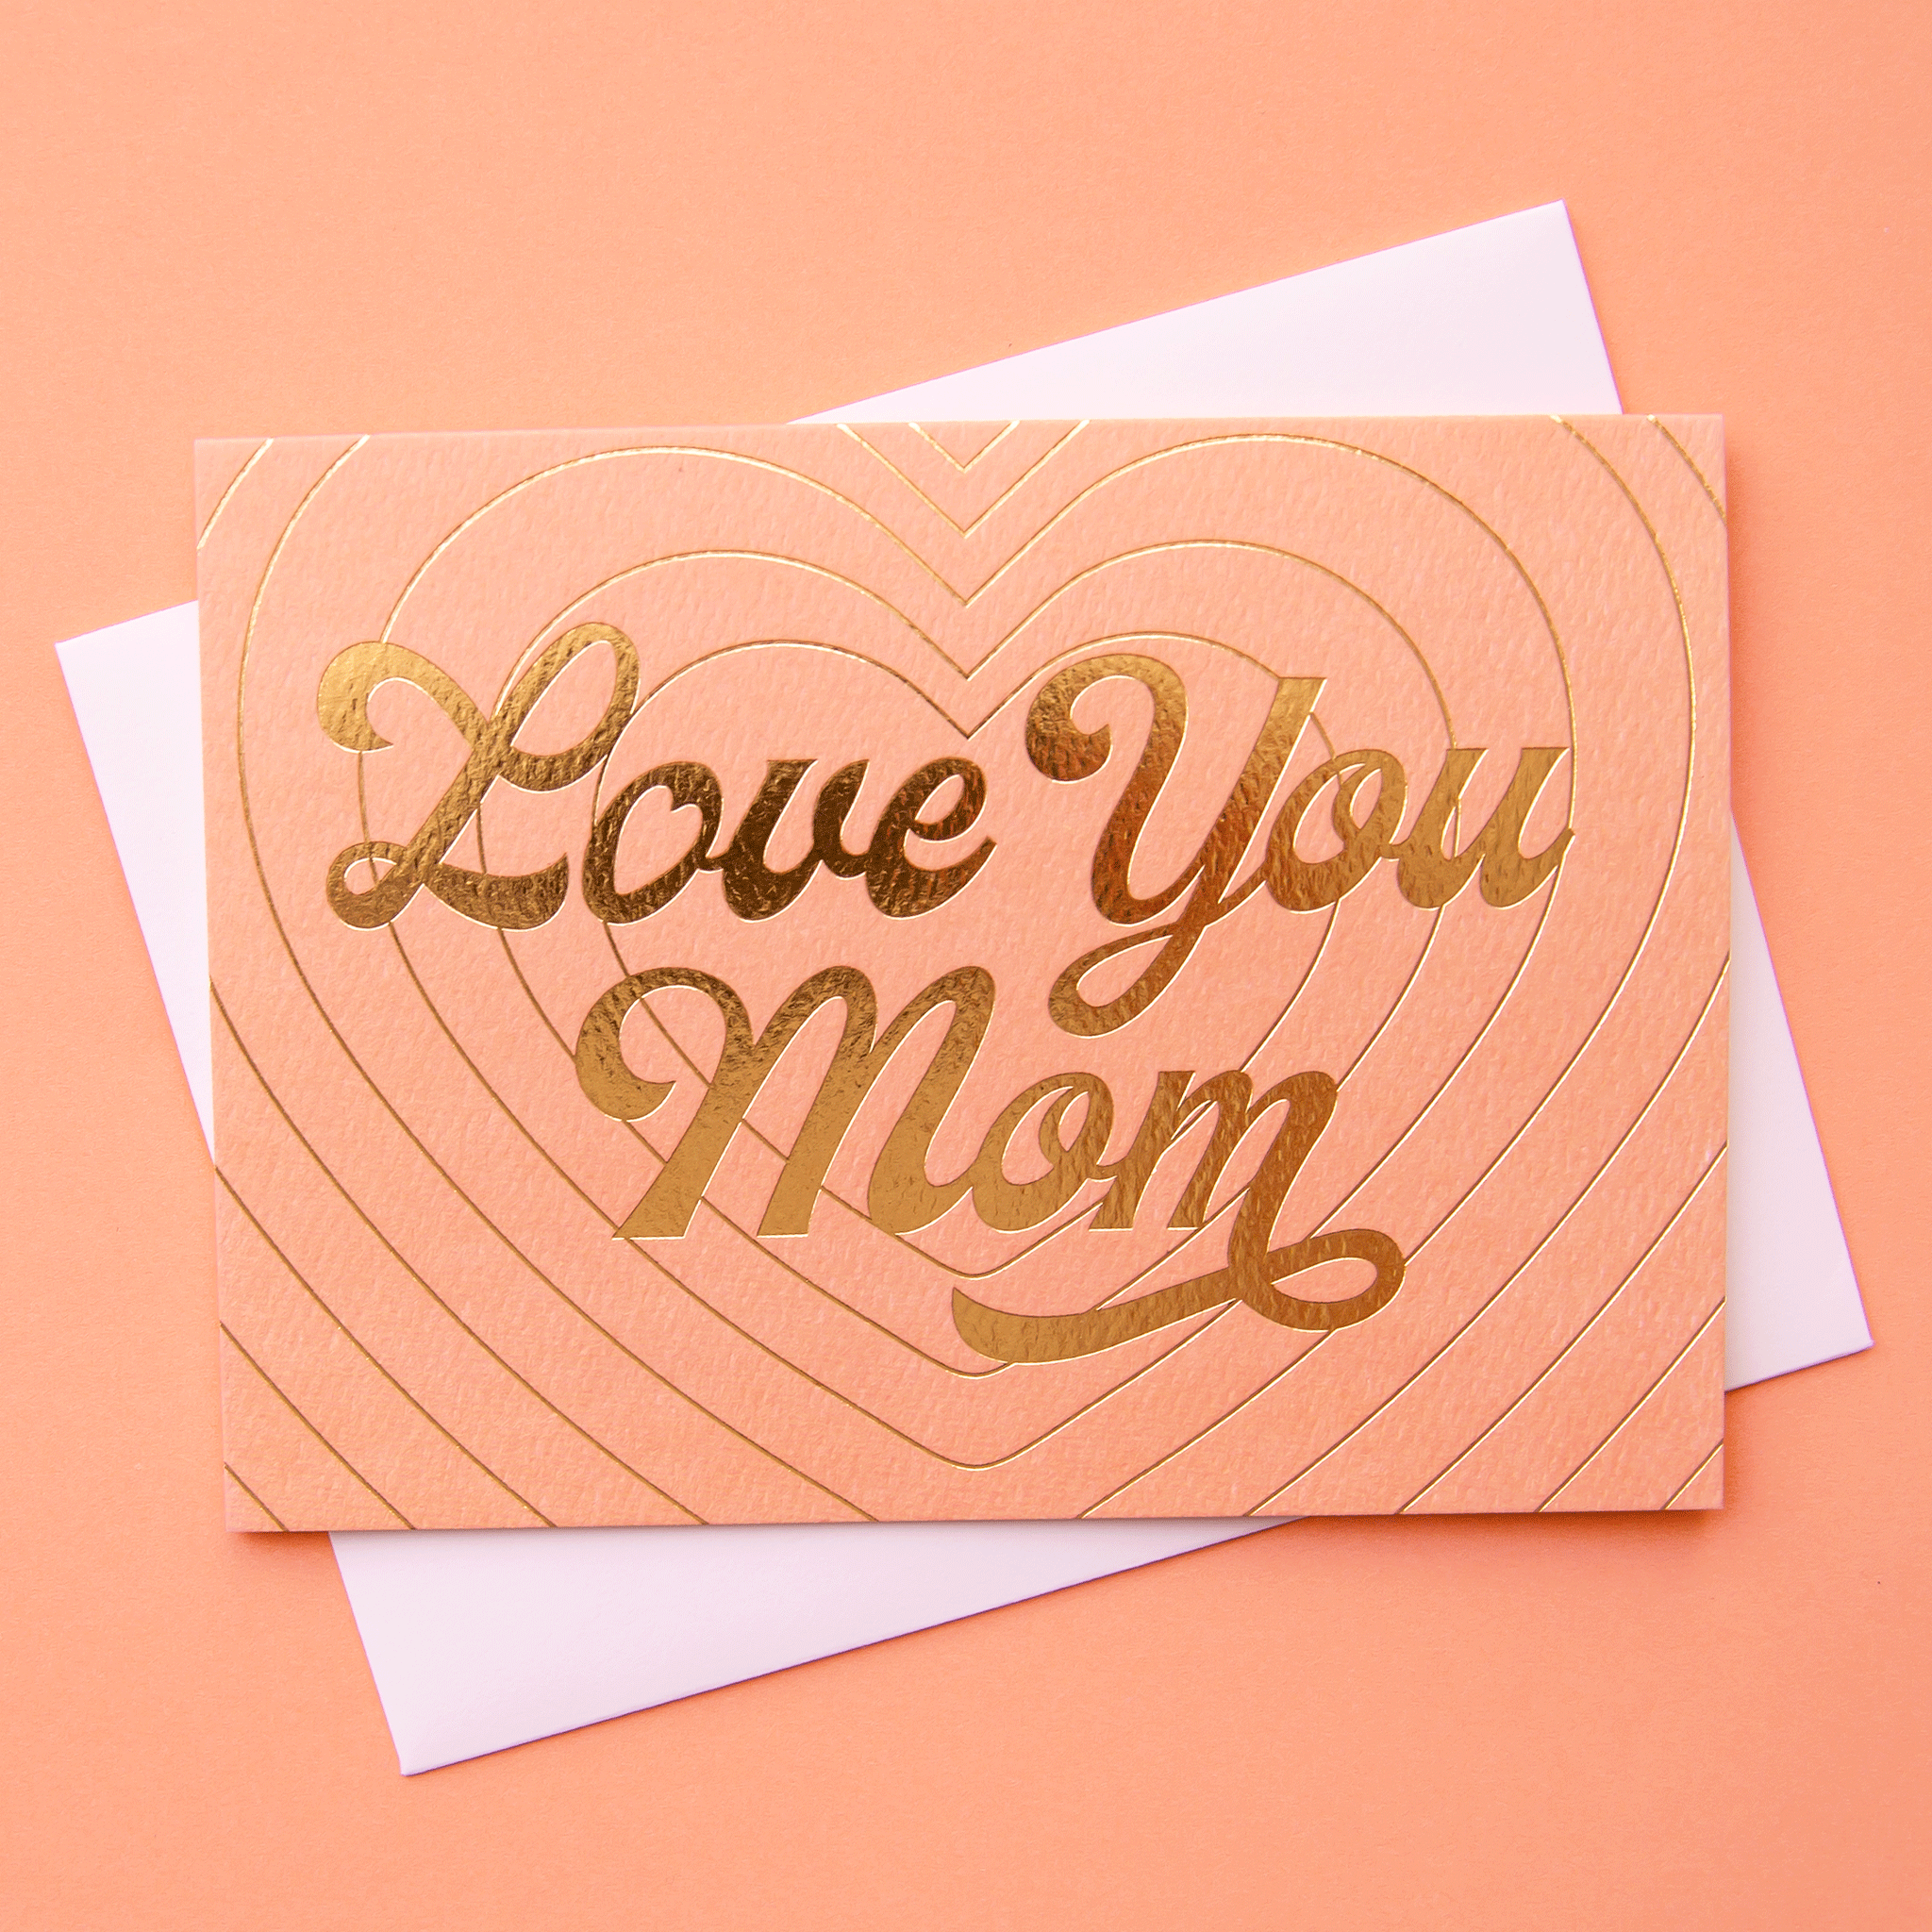 Peach card that reads &#39;love you mom&#39; in gold foil. The card is filled with layers of a beaming gold foil heart design behind and is accompanied by with a white envelope.